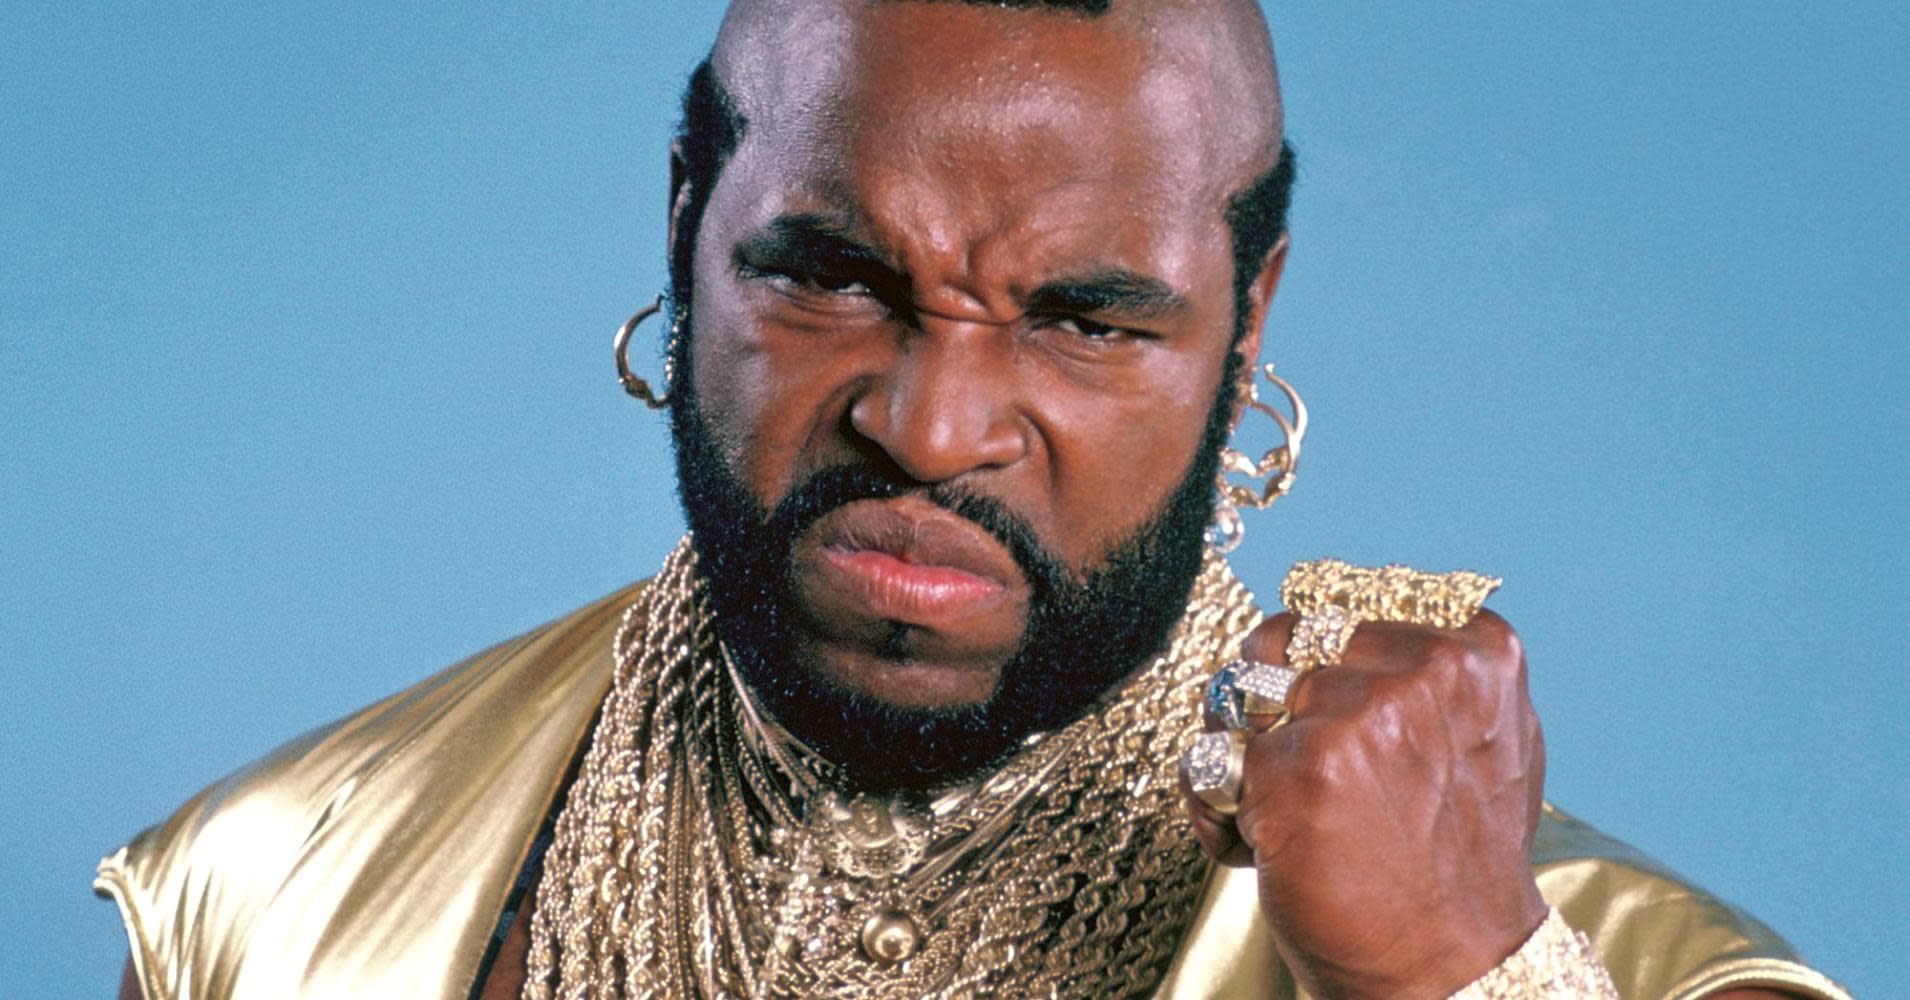 Jim Cramer dishes out a hard dose of reality on making money, Mr. T style. 